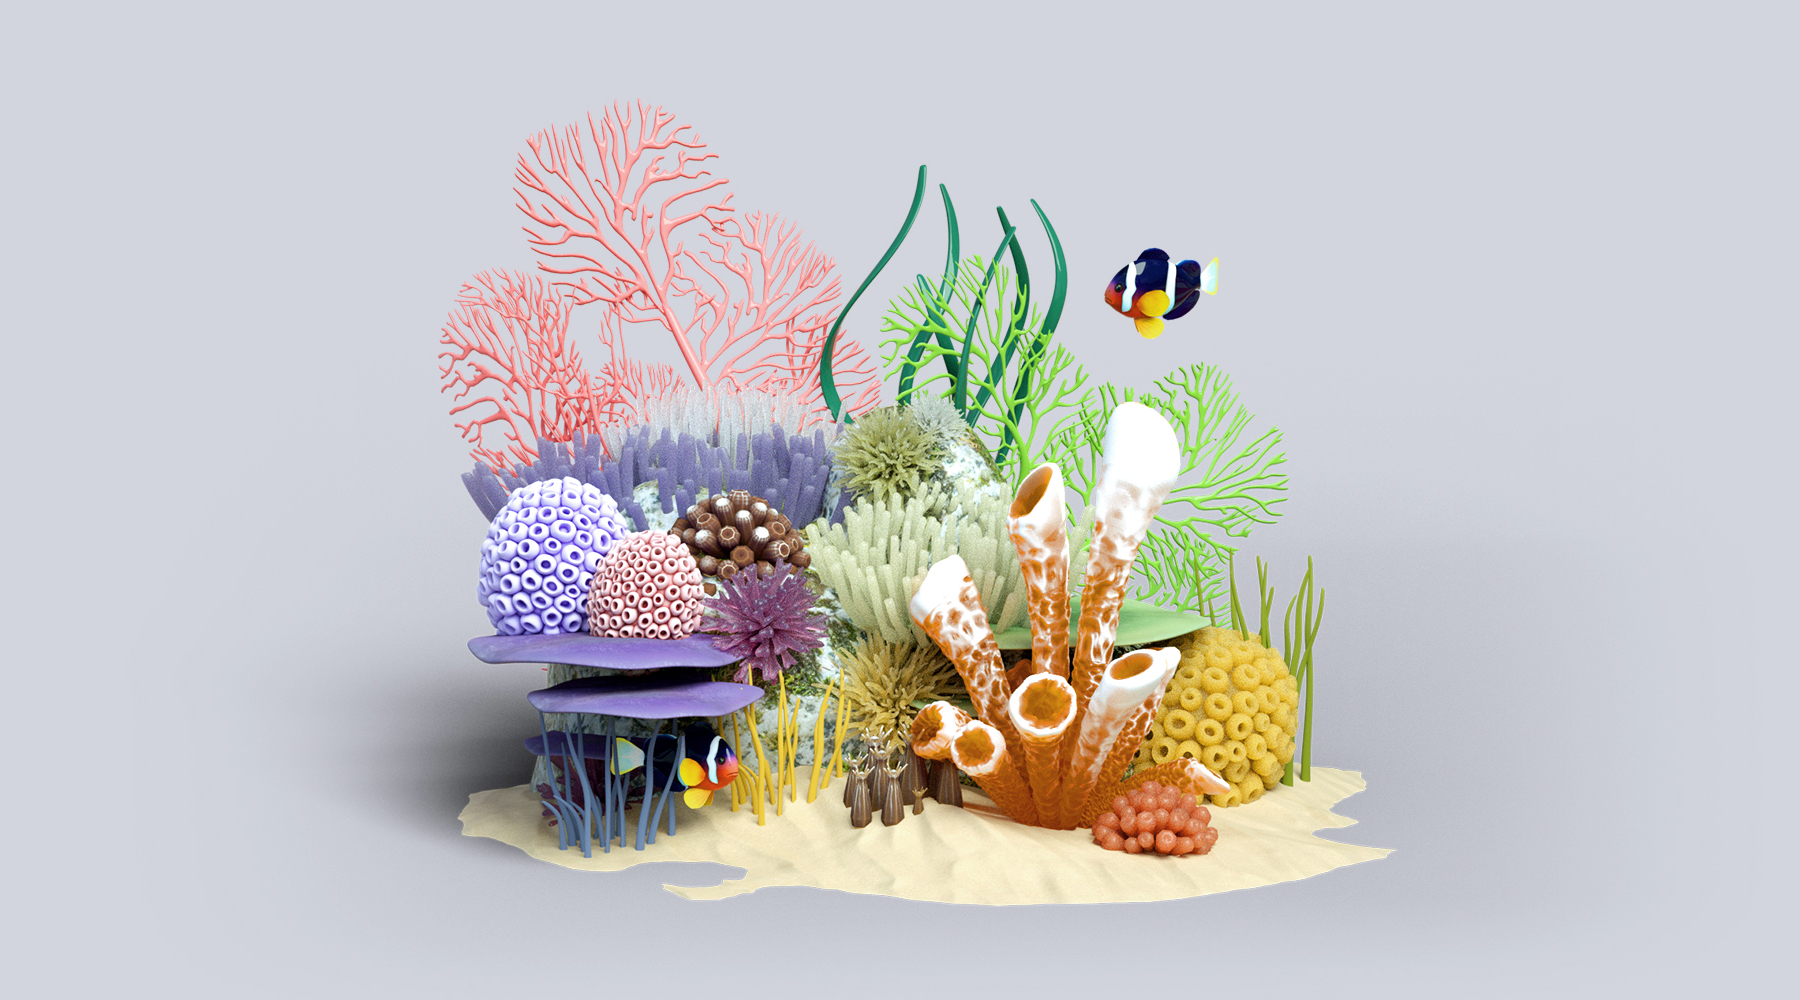 Under the sea bits by Jeremiah Shaw on Dribbble